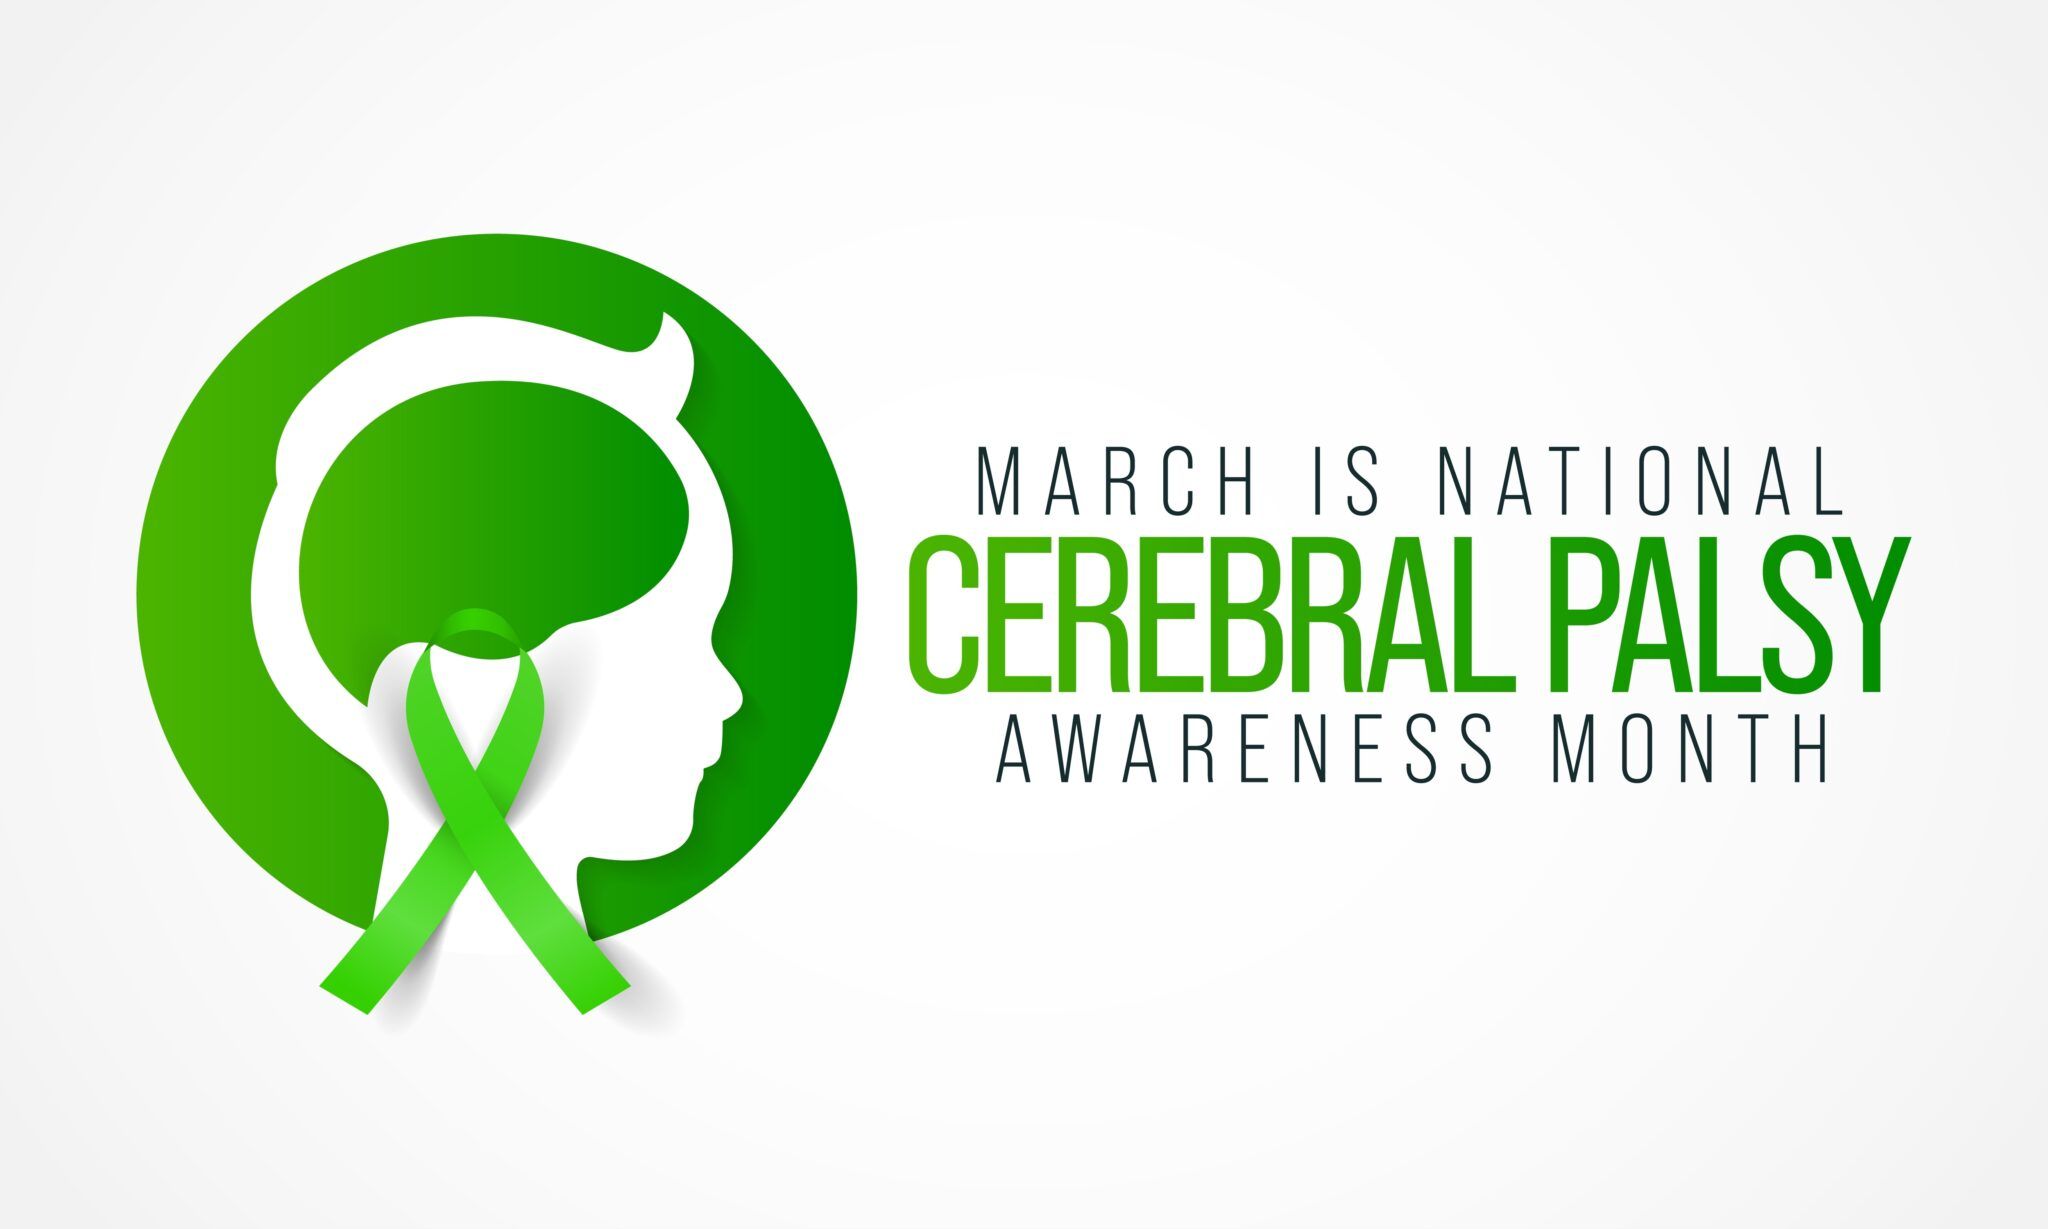 March is Cerebral Palsy Awareness Month Here’s what you need to know